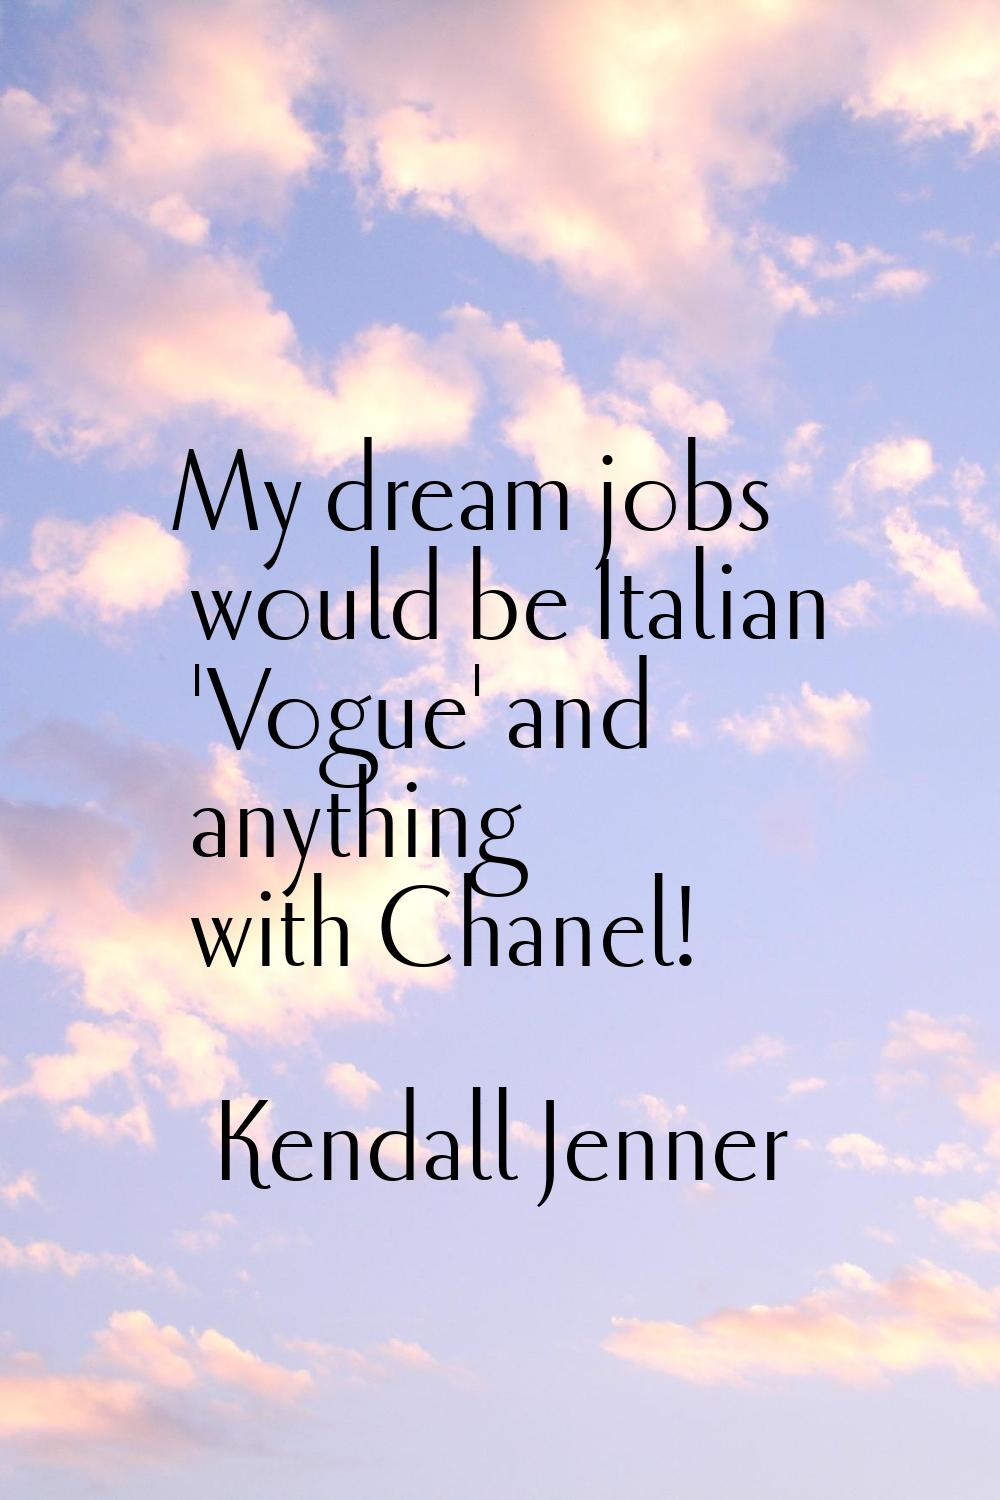 My dream jobs would be Italian 'Vogue' and anything with Chanel!